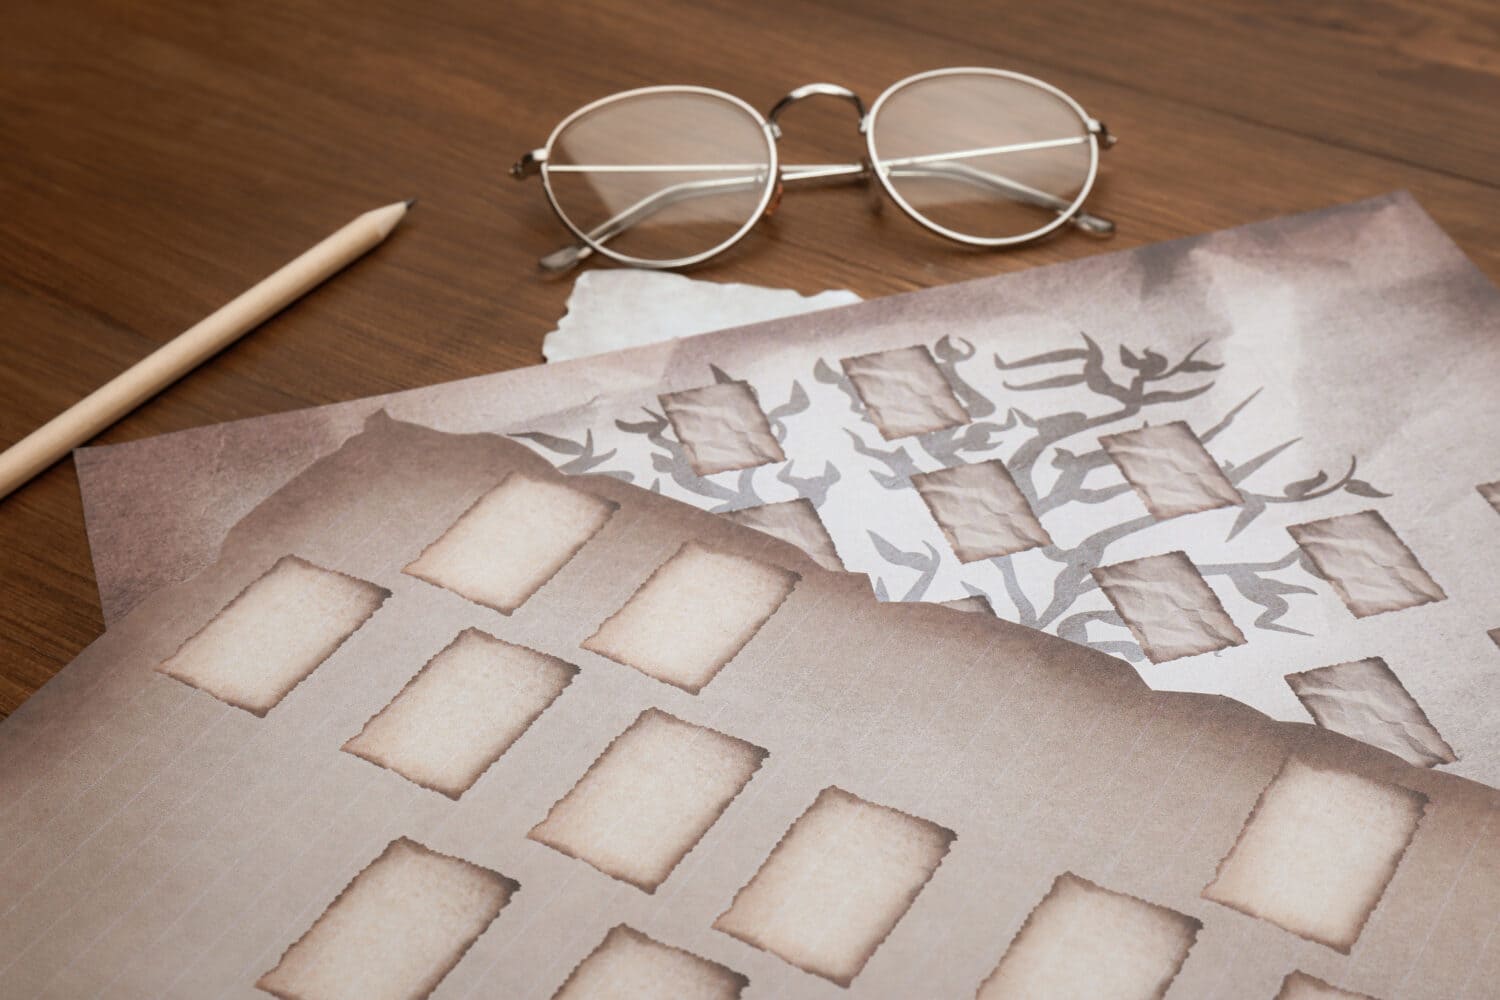 Papers with family tree templates, pencil and glasses on wooden table, closeup